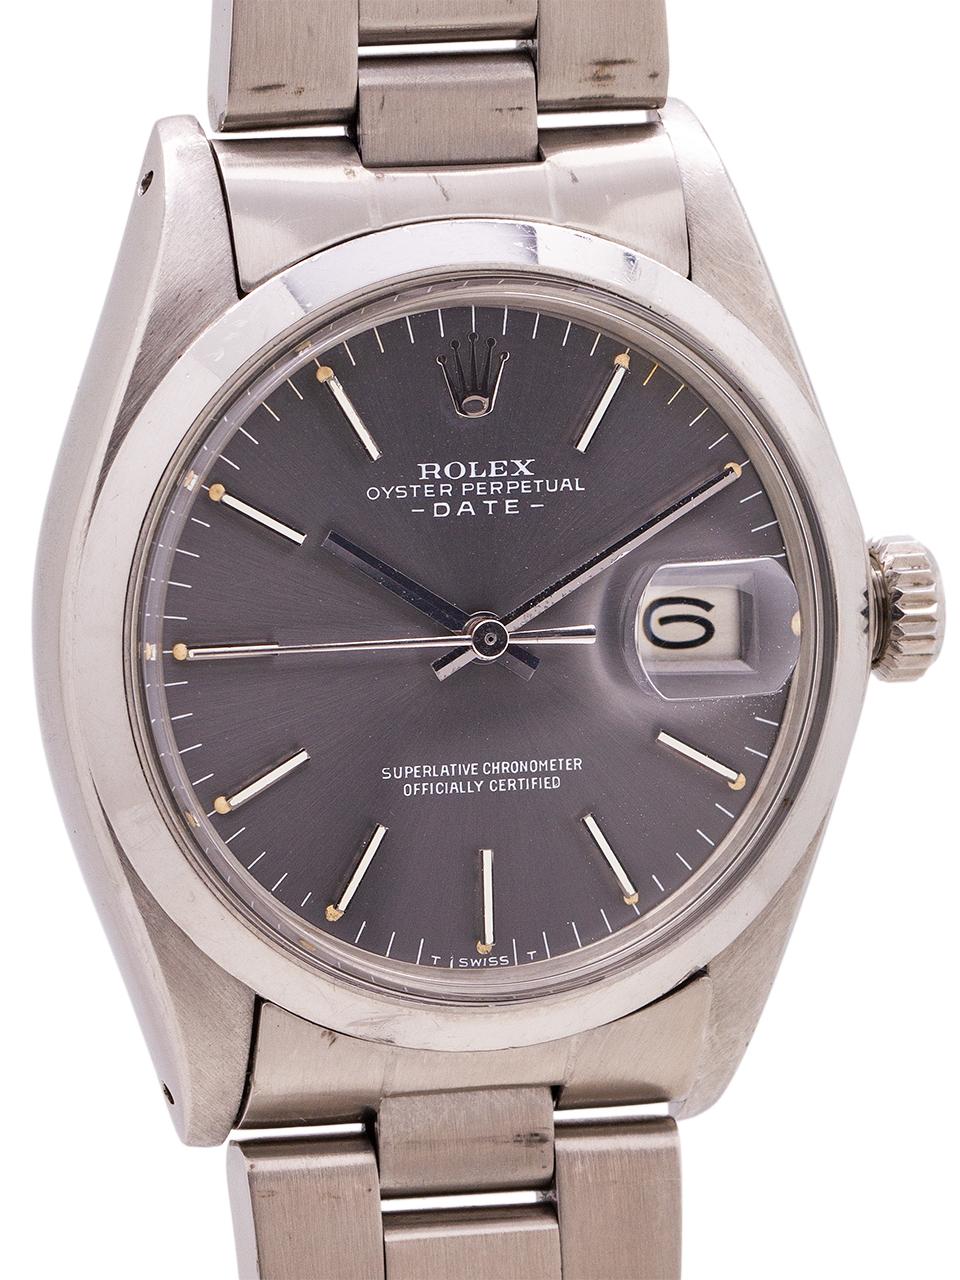 
Rolex Oyster Perpetual Date ref 1500 serial # 3.1 million circa 1972. Featuring a 34mm diameter stainless steel case with smooth bezel and scarce original gray dial. Powered by self winding calibre 1570 movement with sweep seconds and date. Worn on